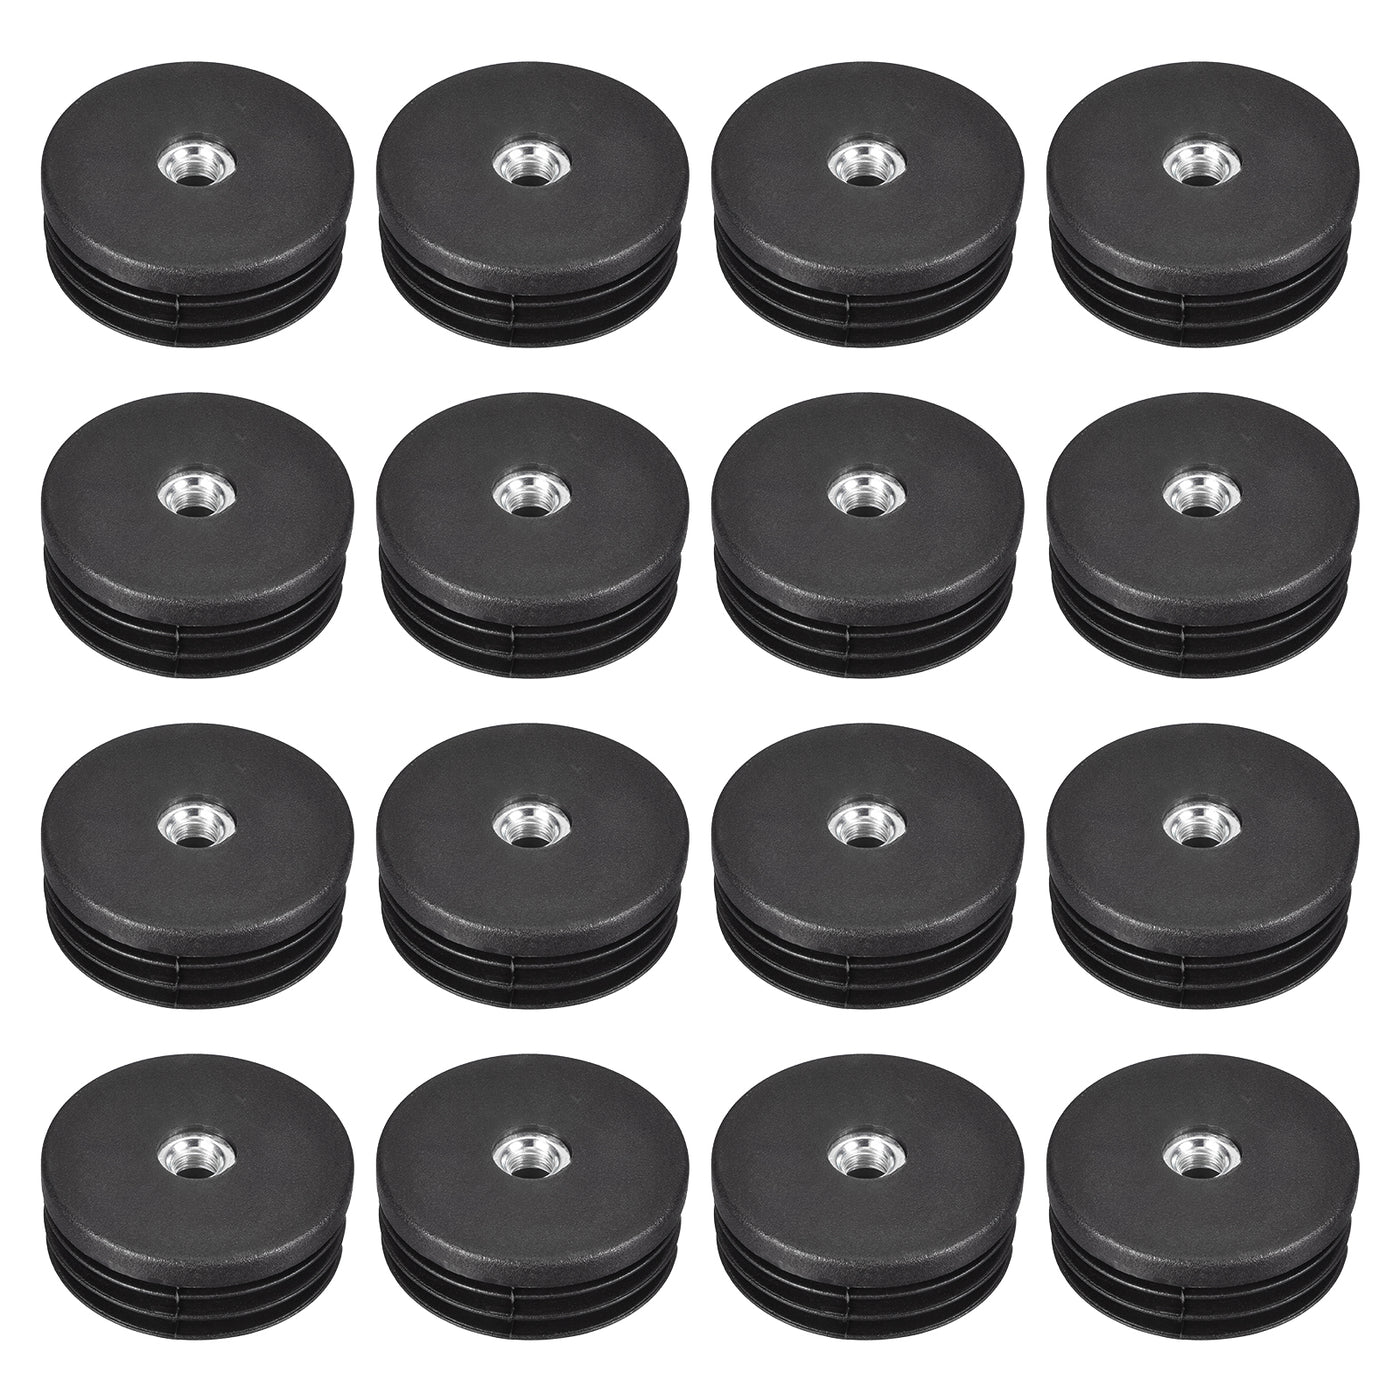 uxcell Uxcell 24Pcs 50mm/1.97" Caster Insert with Thread, Round M8 Thread for Furniture